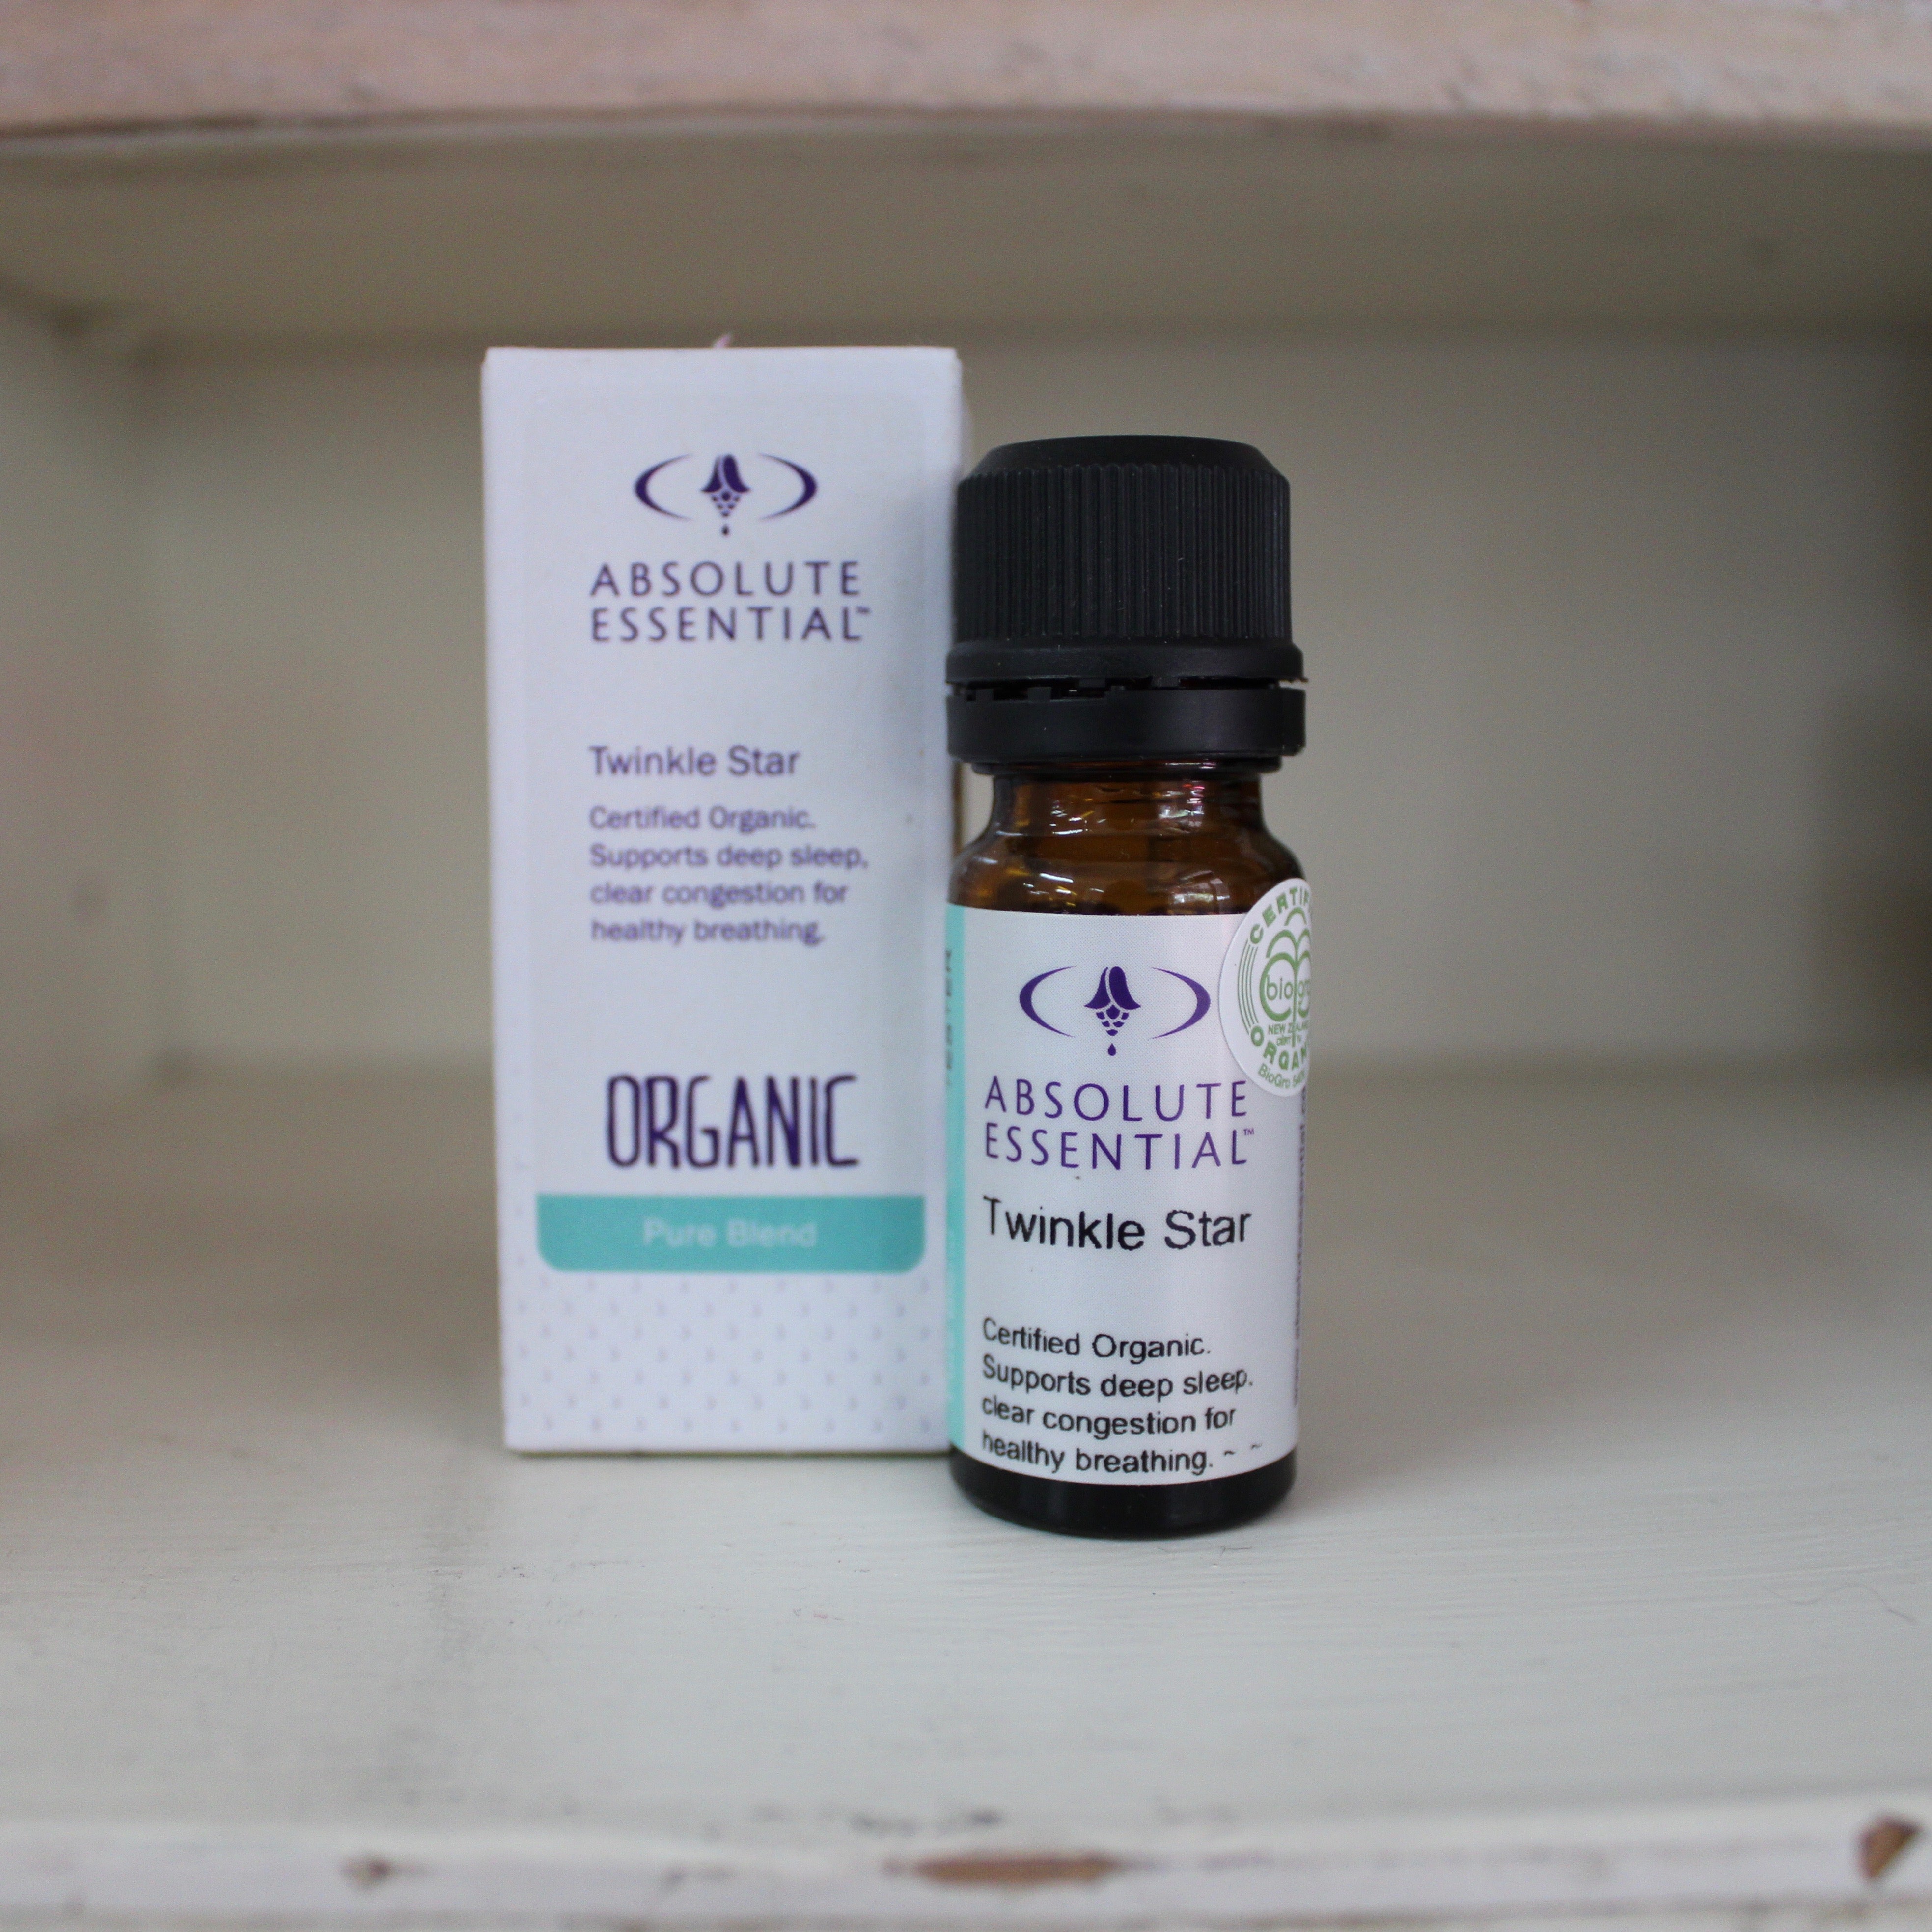 Absolute Essential Twinkle Star (Organic) 10ml Pure Blend